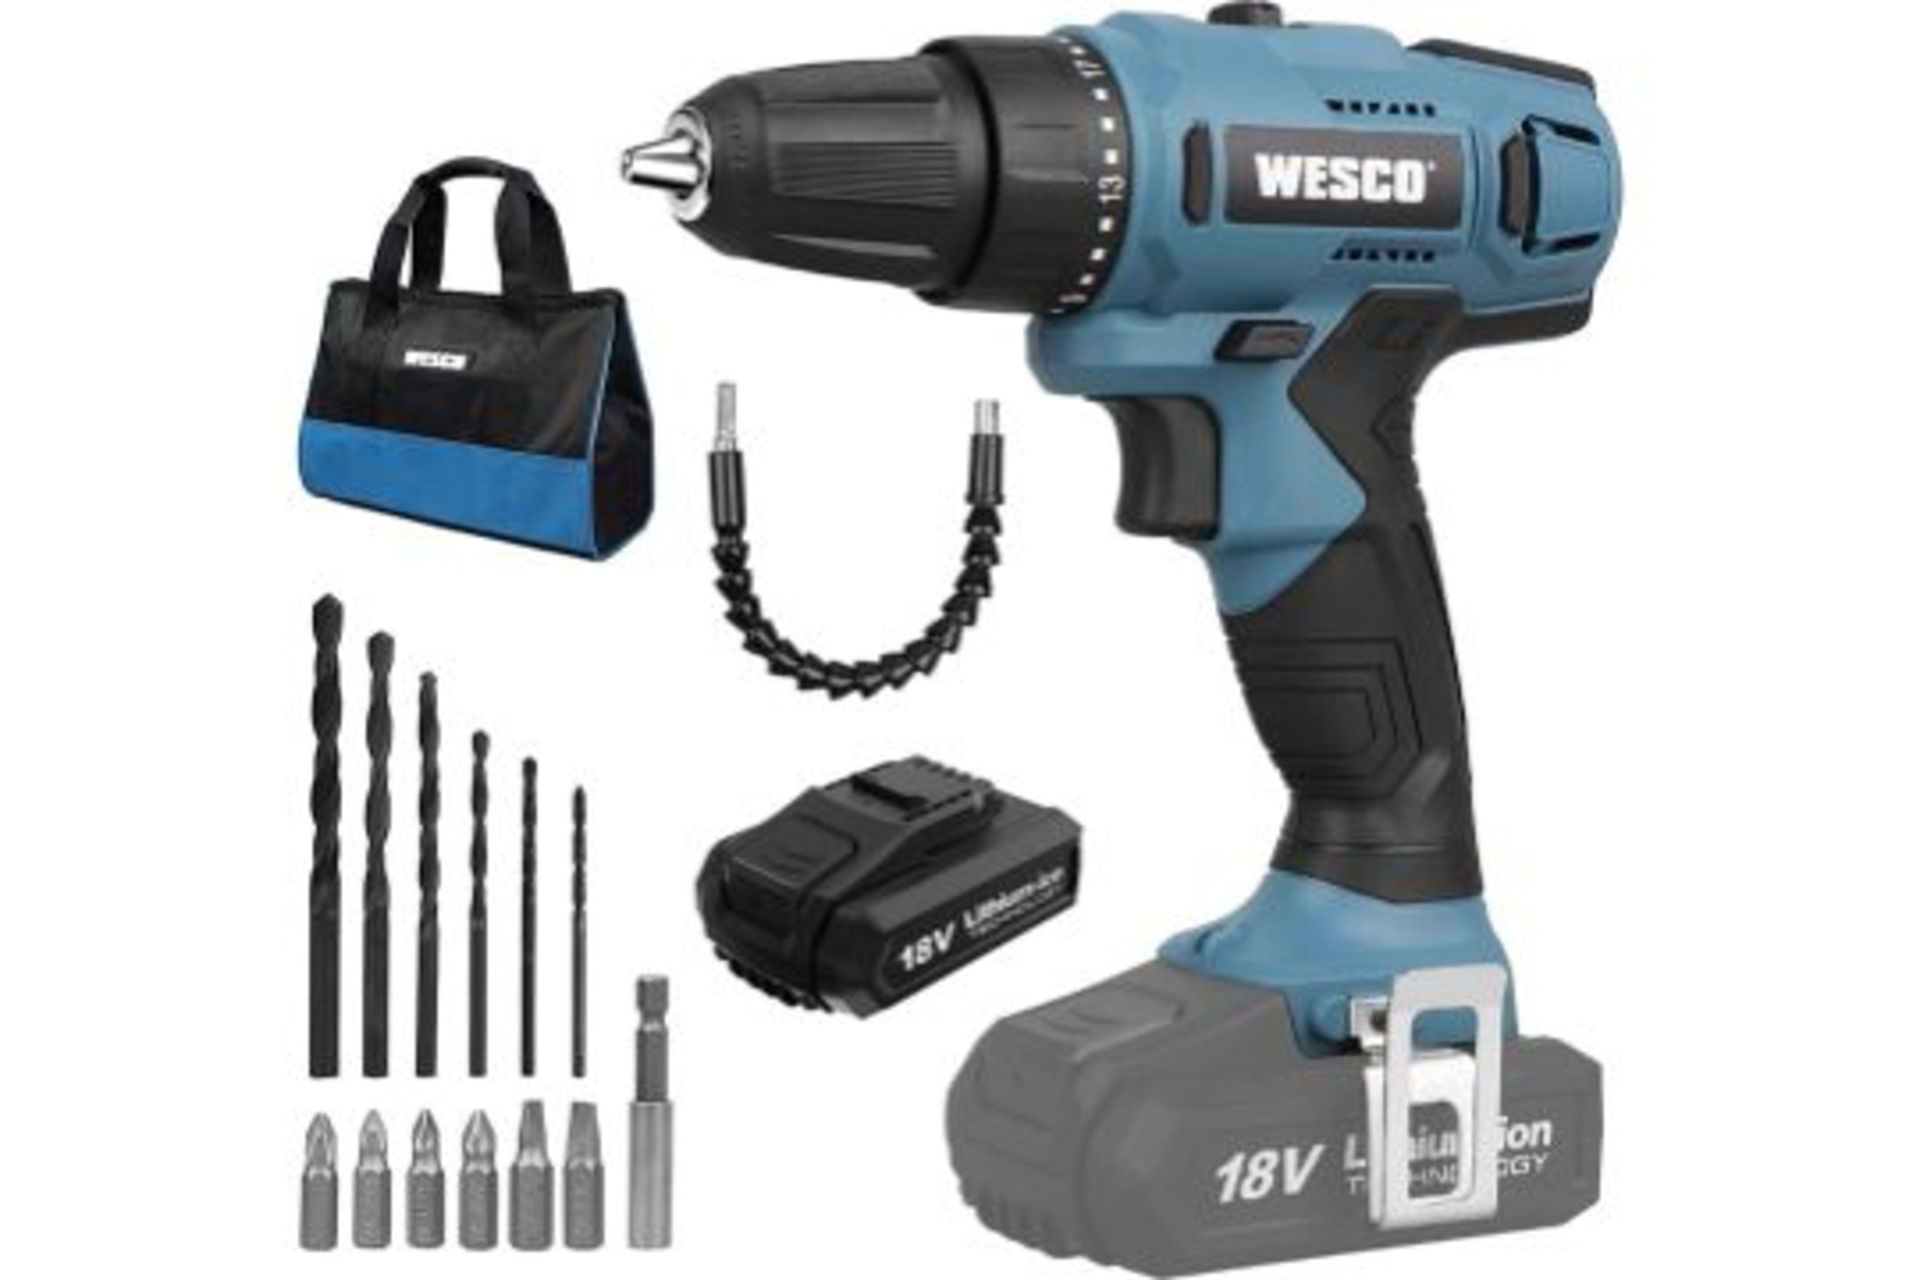 NEW BOXED Cordless Drill, WESCO 18V 2.0Ah Power Combi Drill Kit with Li-ion Battery and Charger,